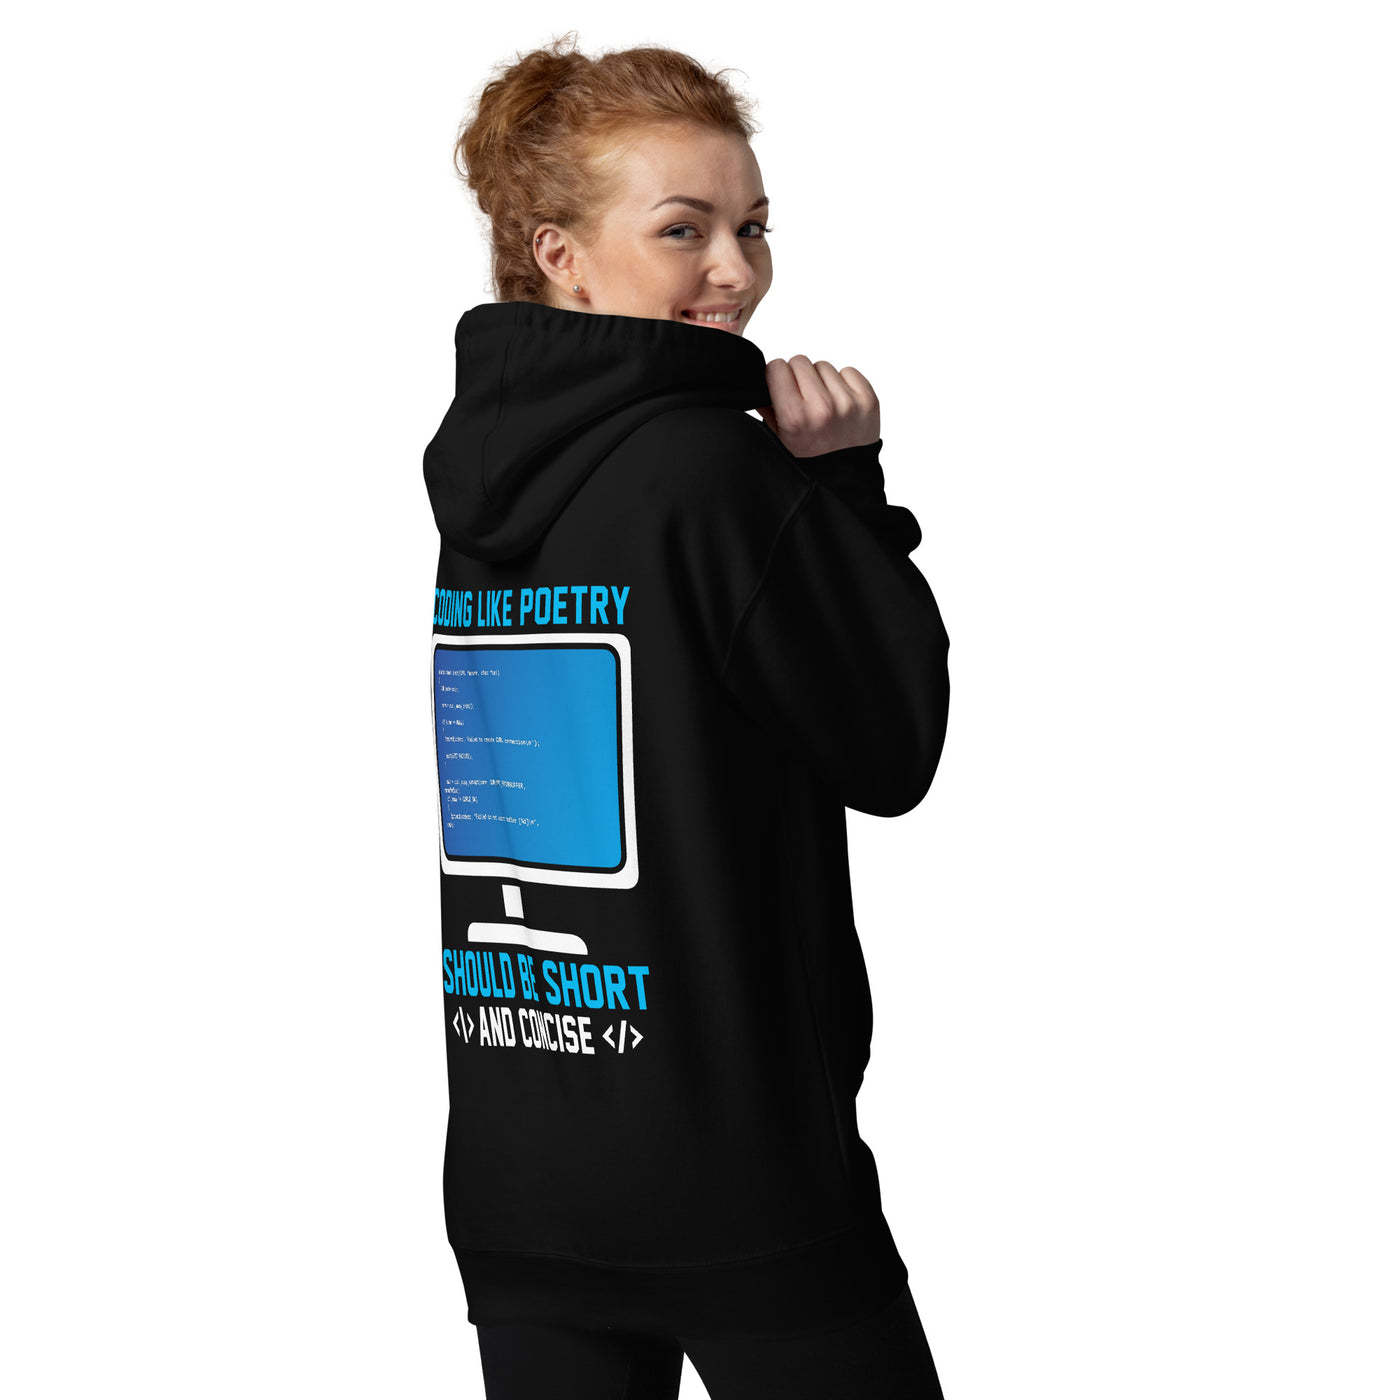 Coding like Poetry, should be short and concise Unisex Hoodie  ( Back Print )